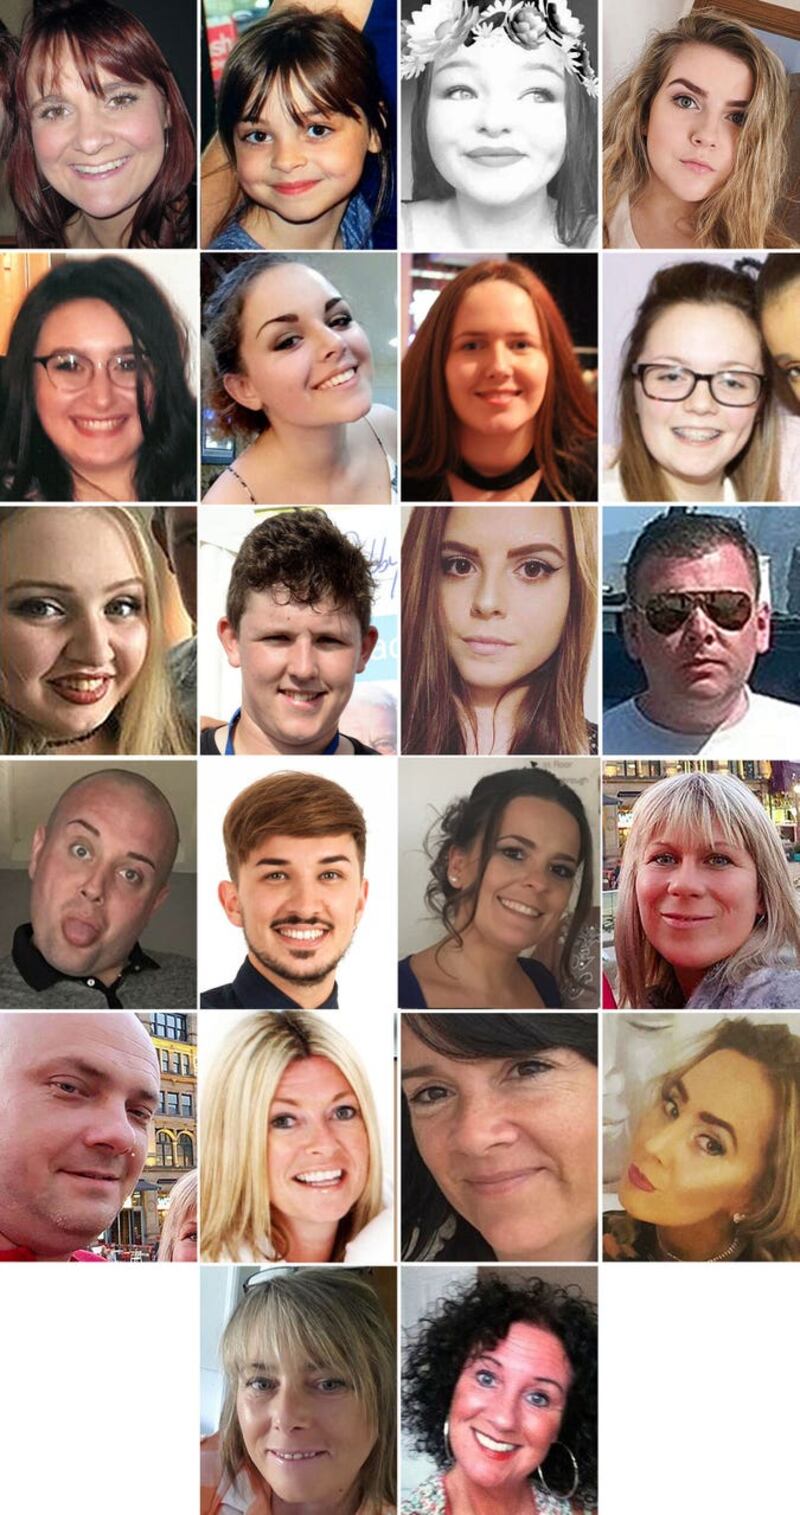 The 22 victims of the terror attack during the Ariana Grande concert at the Manchester Arena